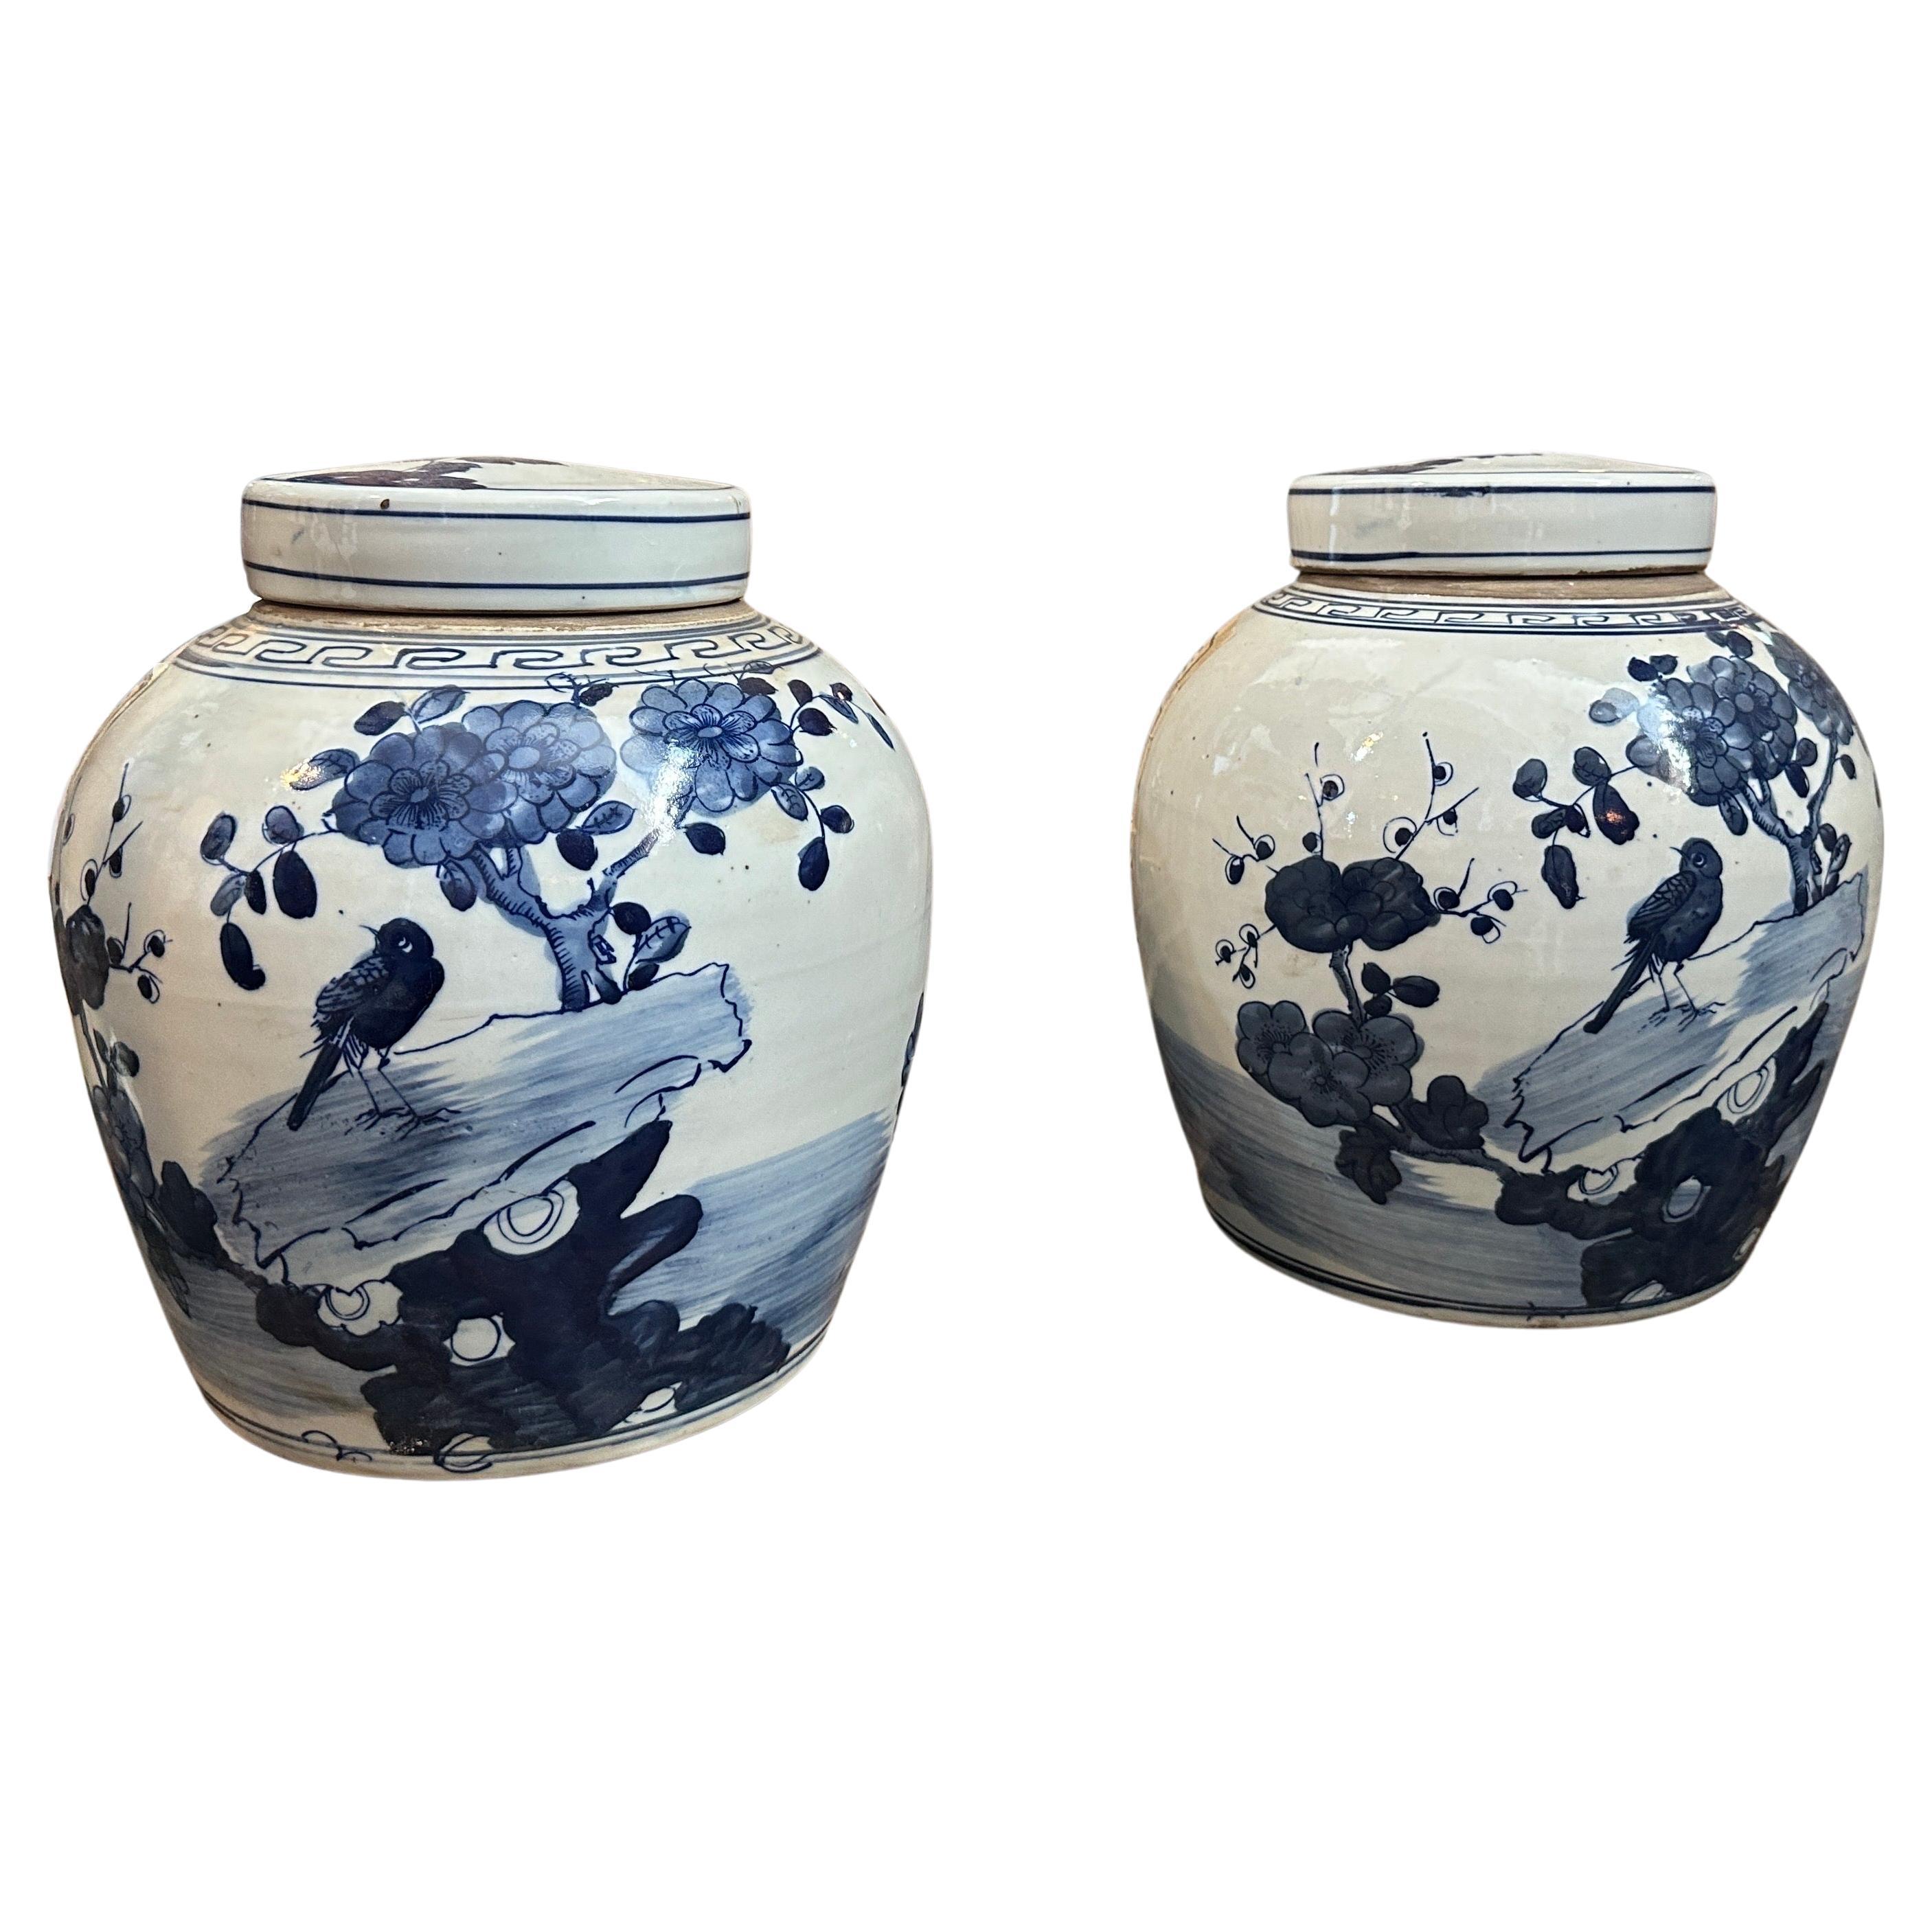 A Pair of Late 20th Century Blue and White Ceramic Chinese Ginger Jars